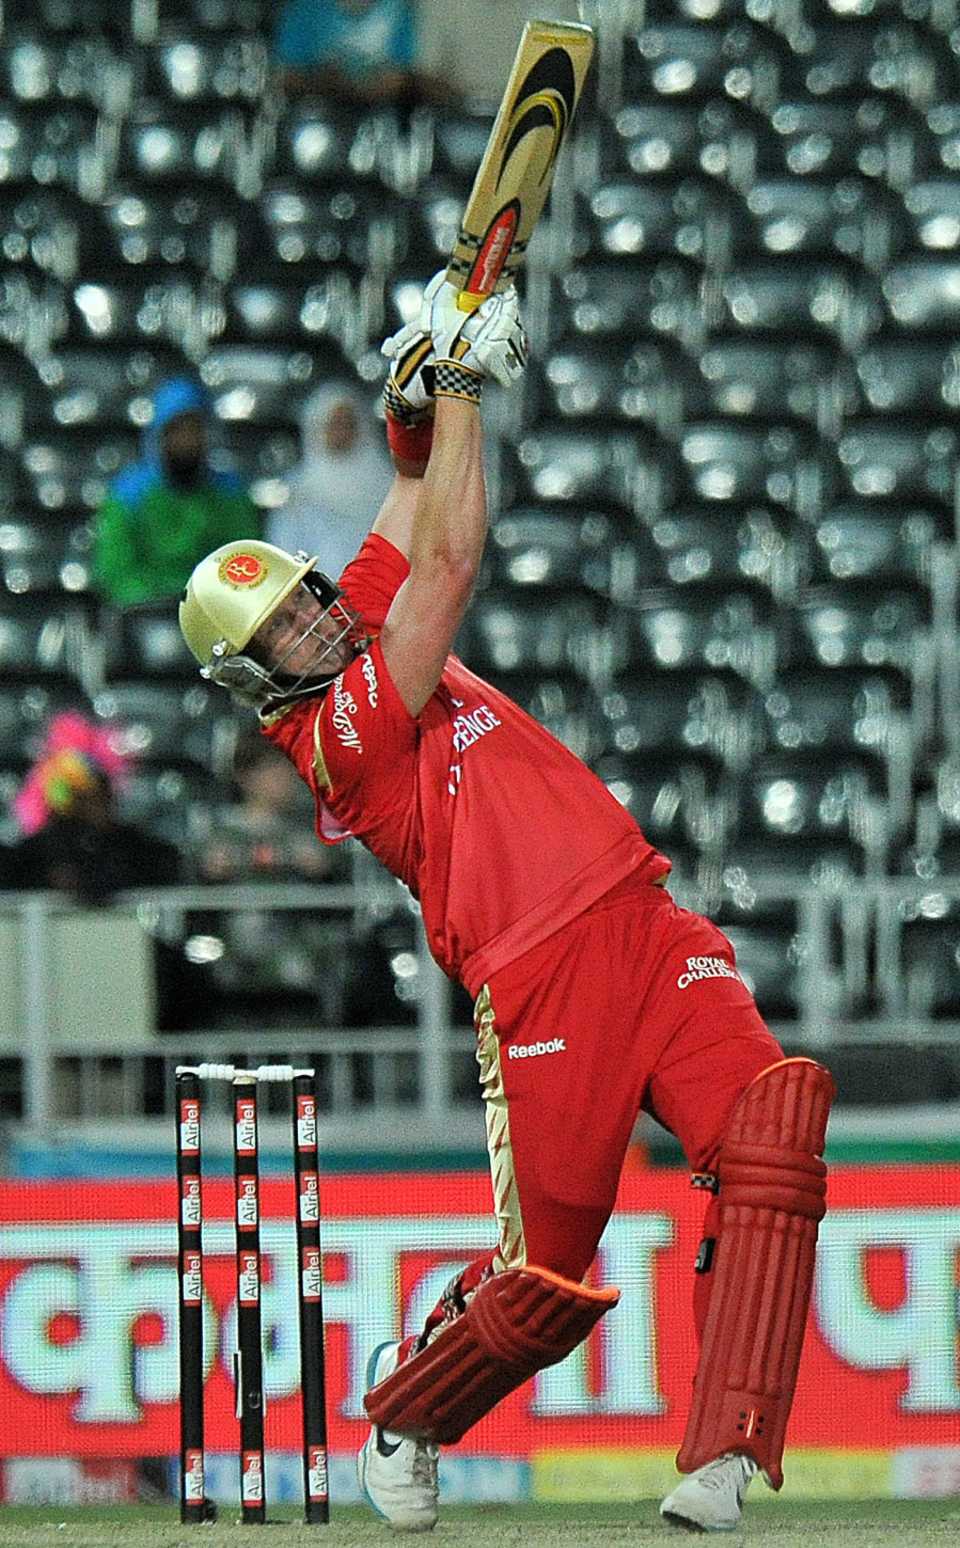 Cameron White launches one out of the ground, Lions v Bangalore, CLT20 2010, Johannesburg